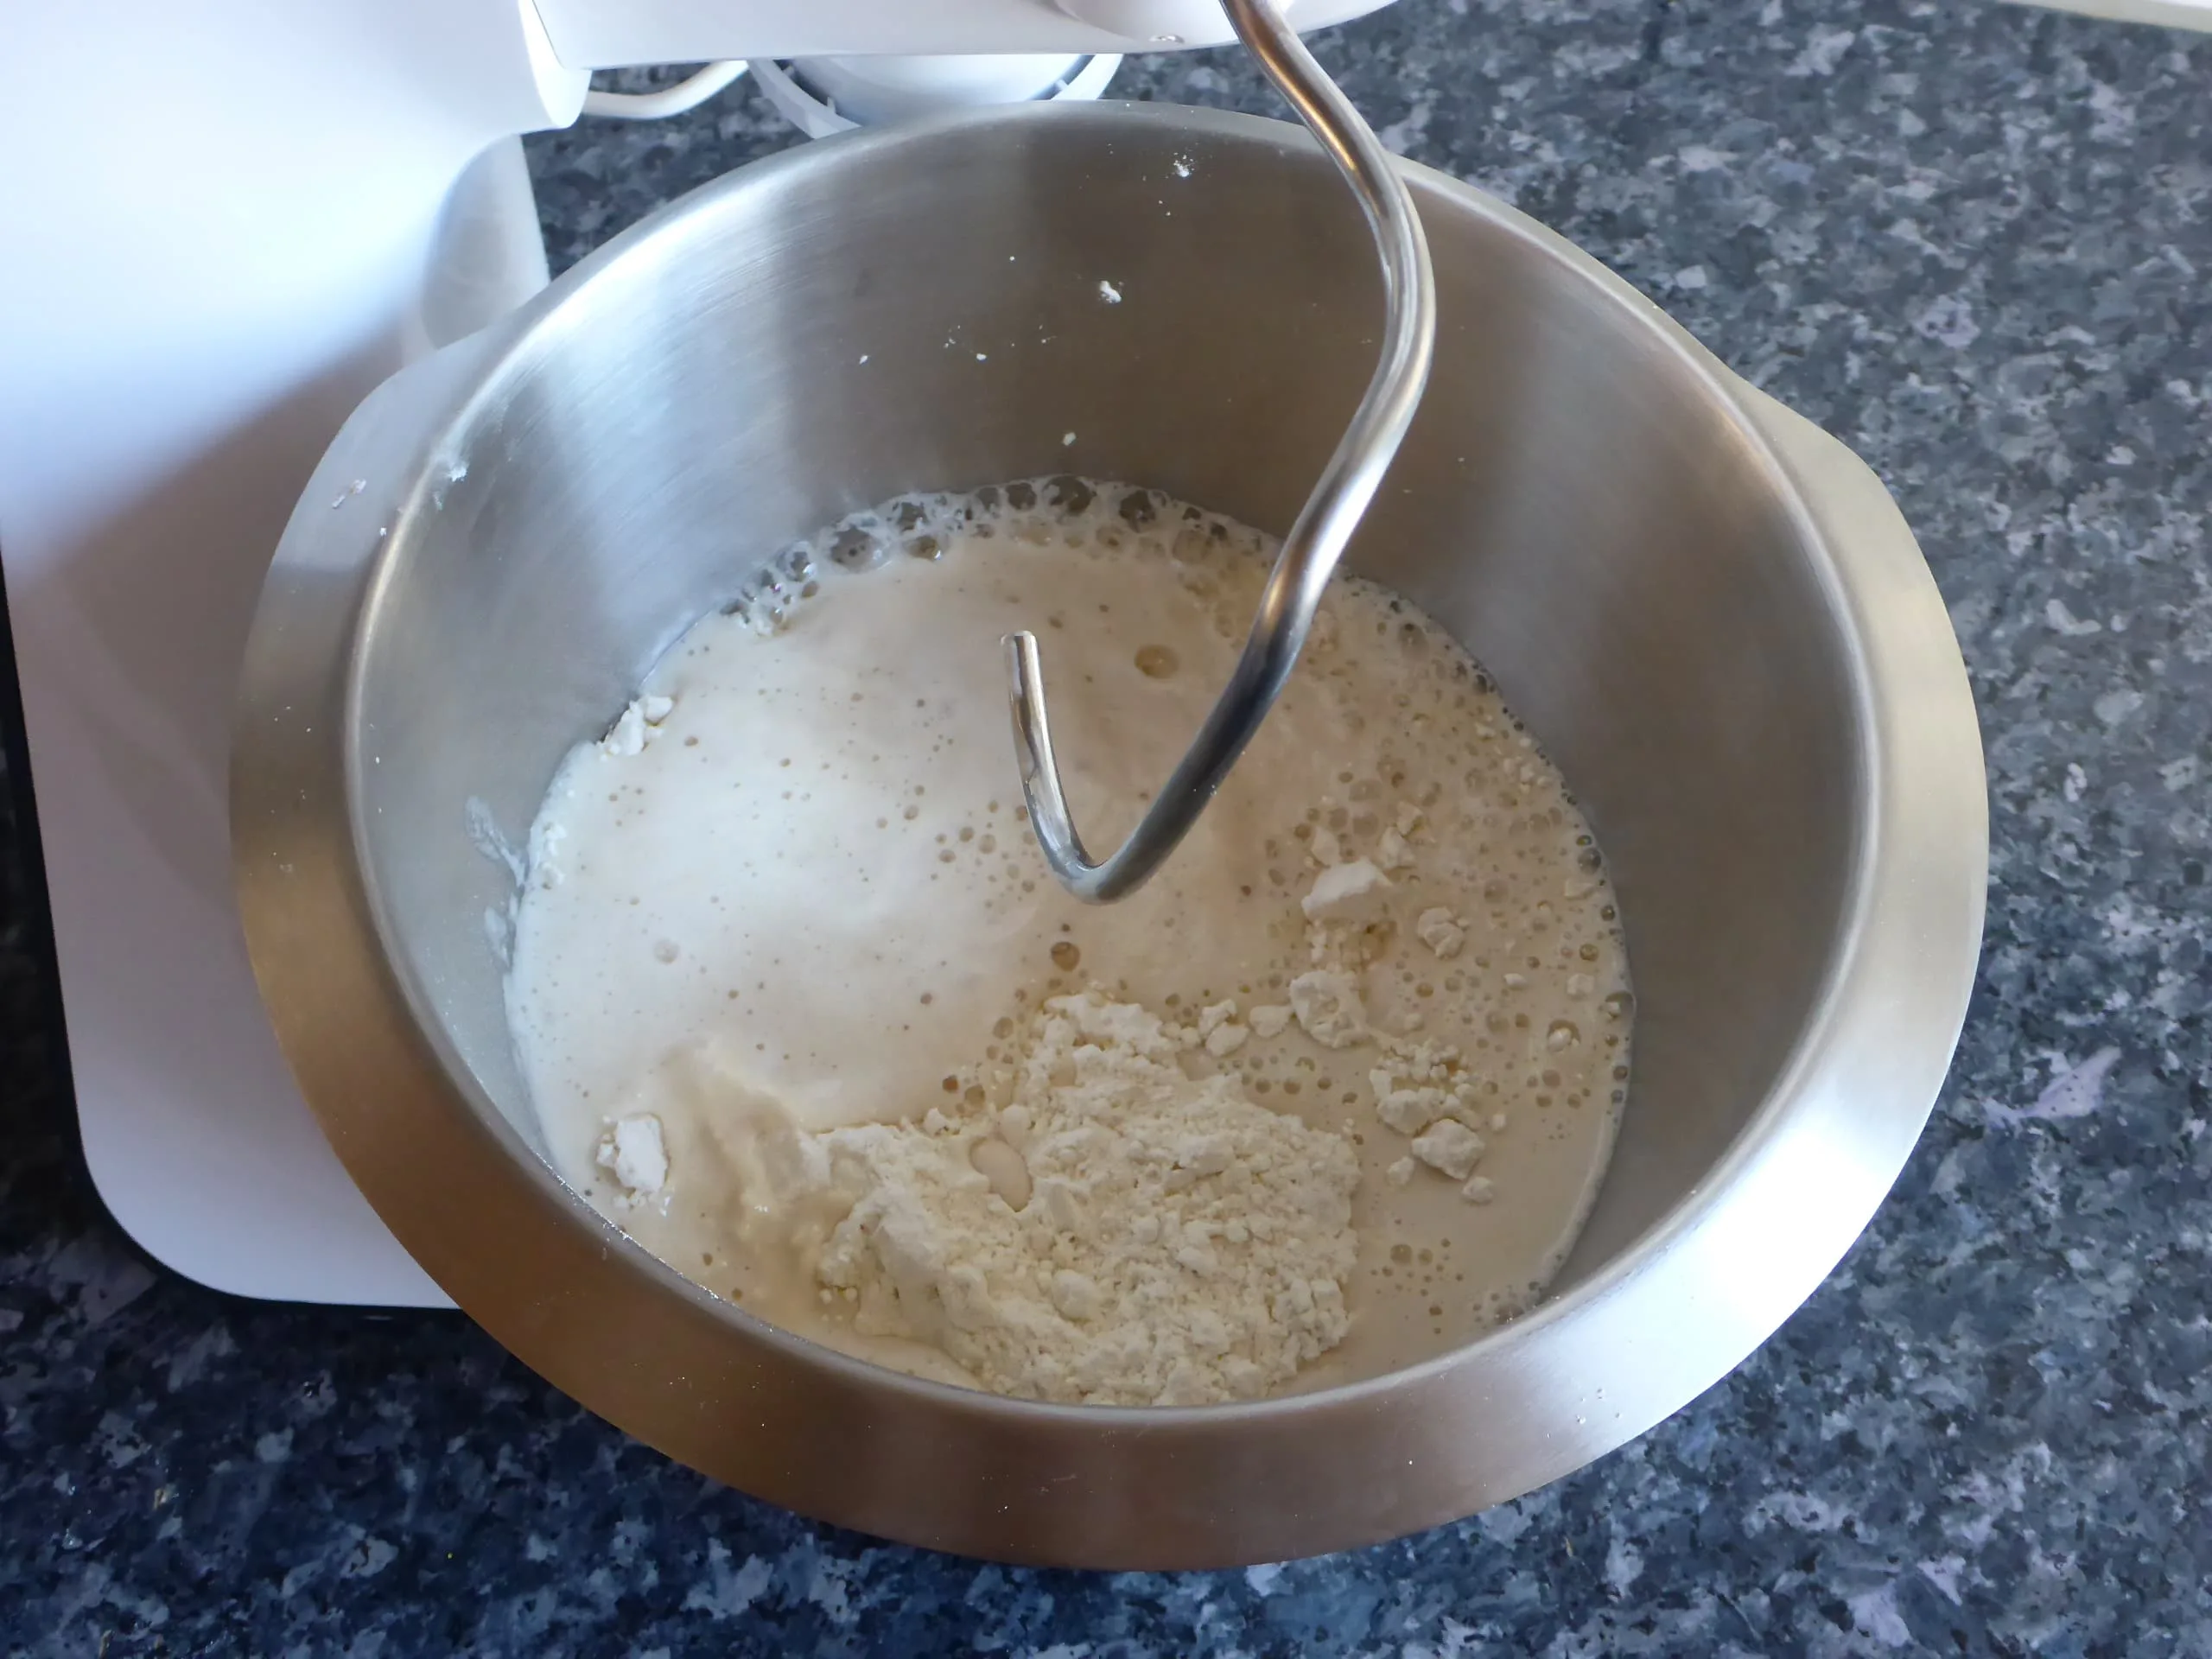 How to make yeast dough with activated dry yeast.